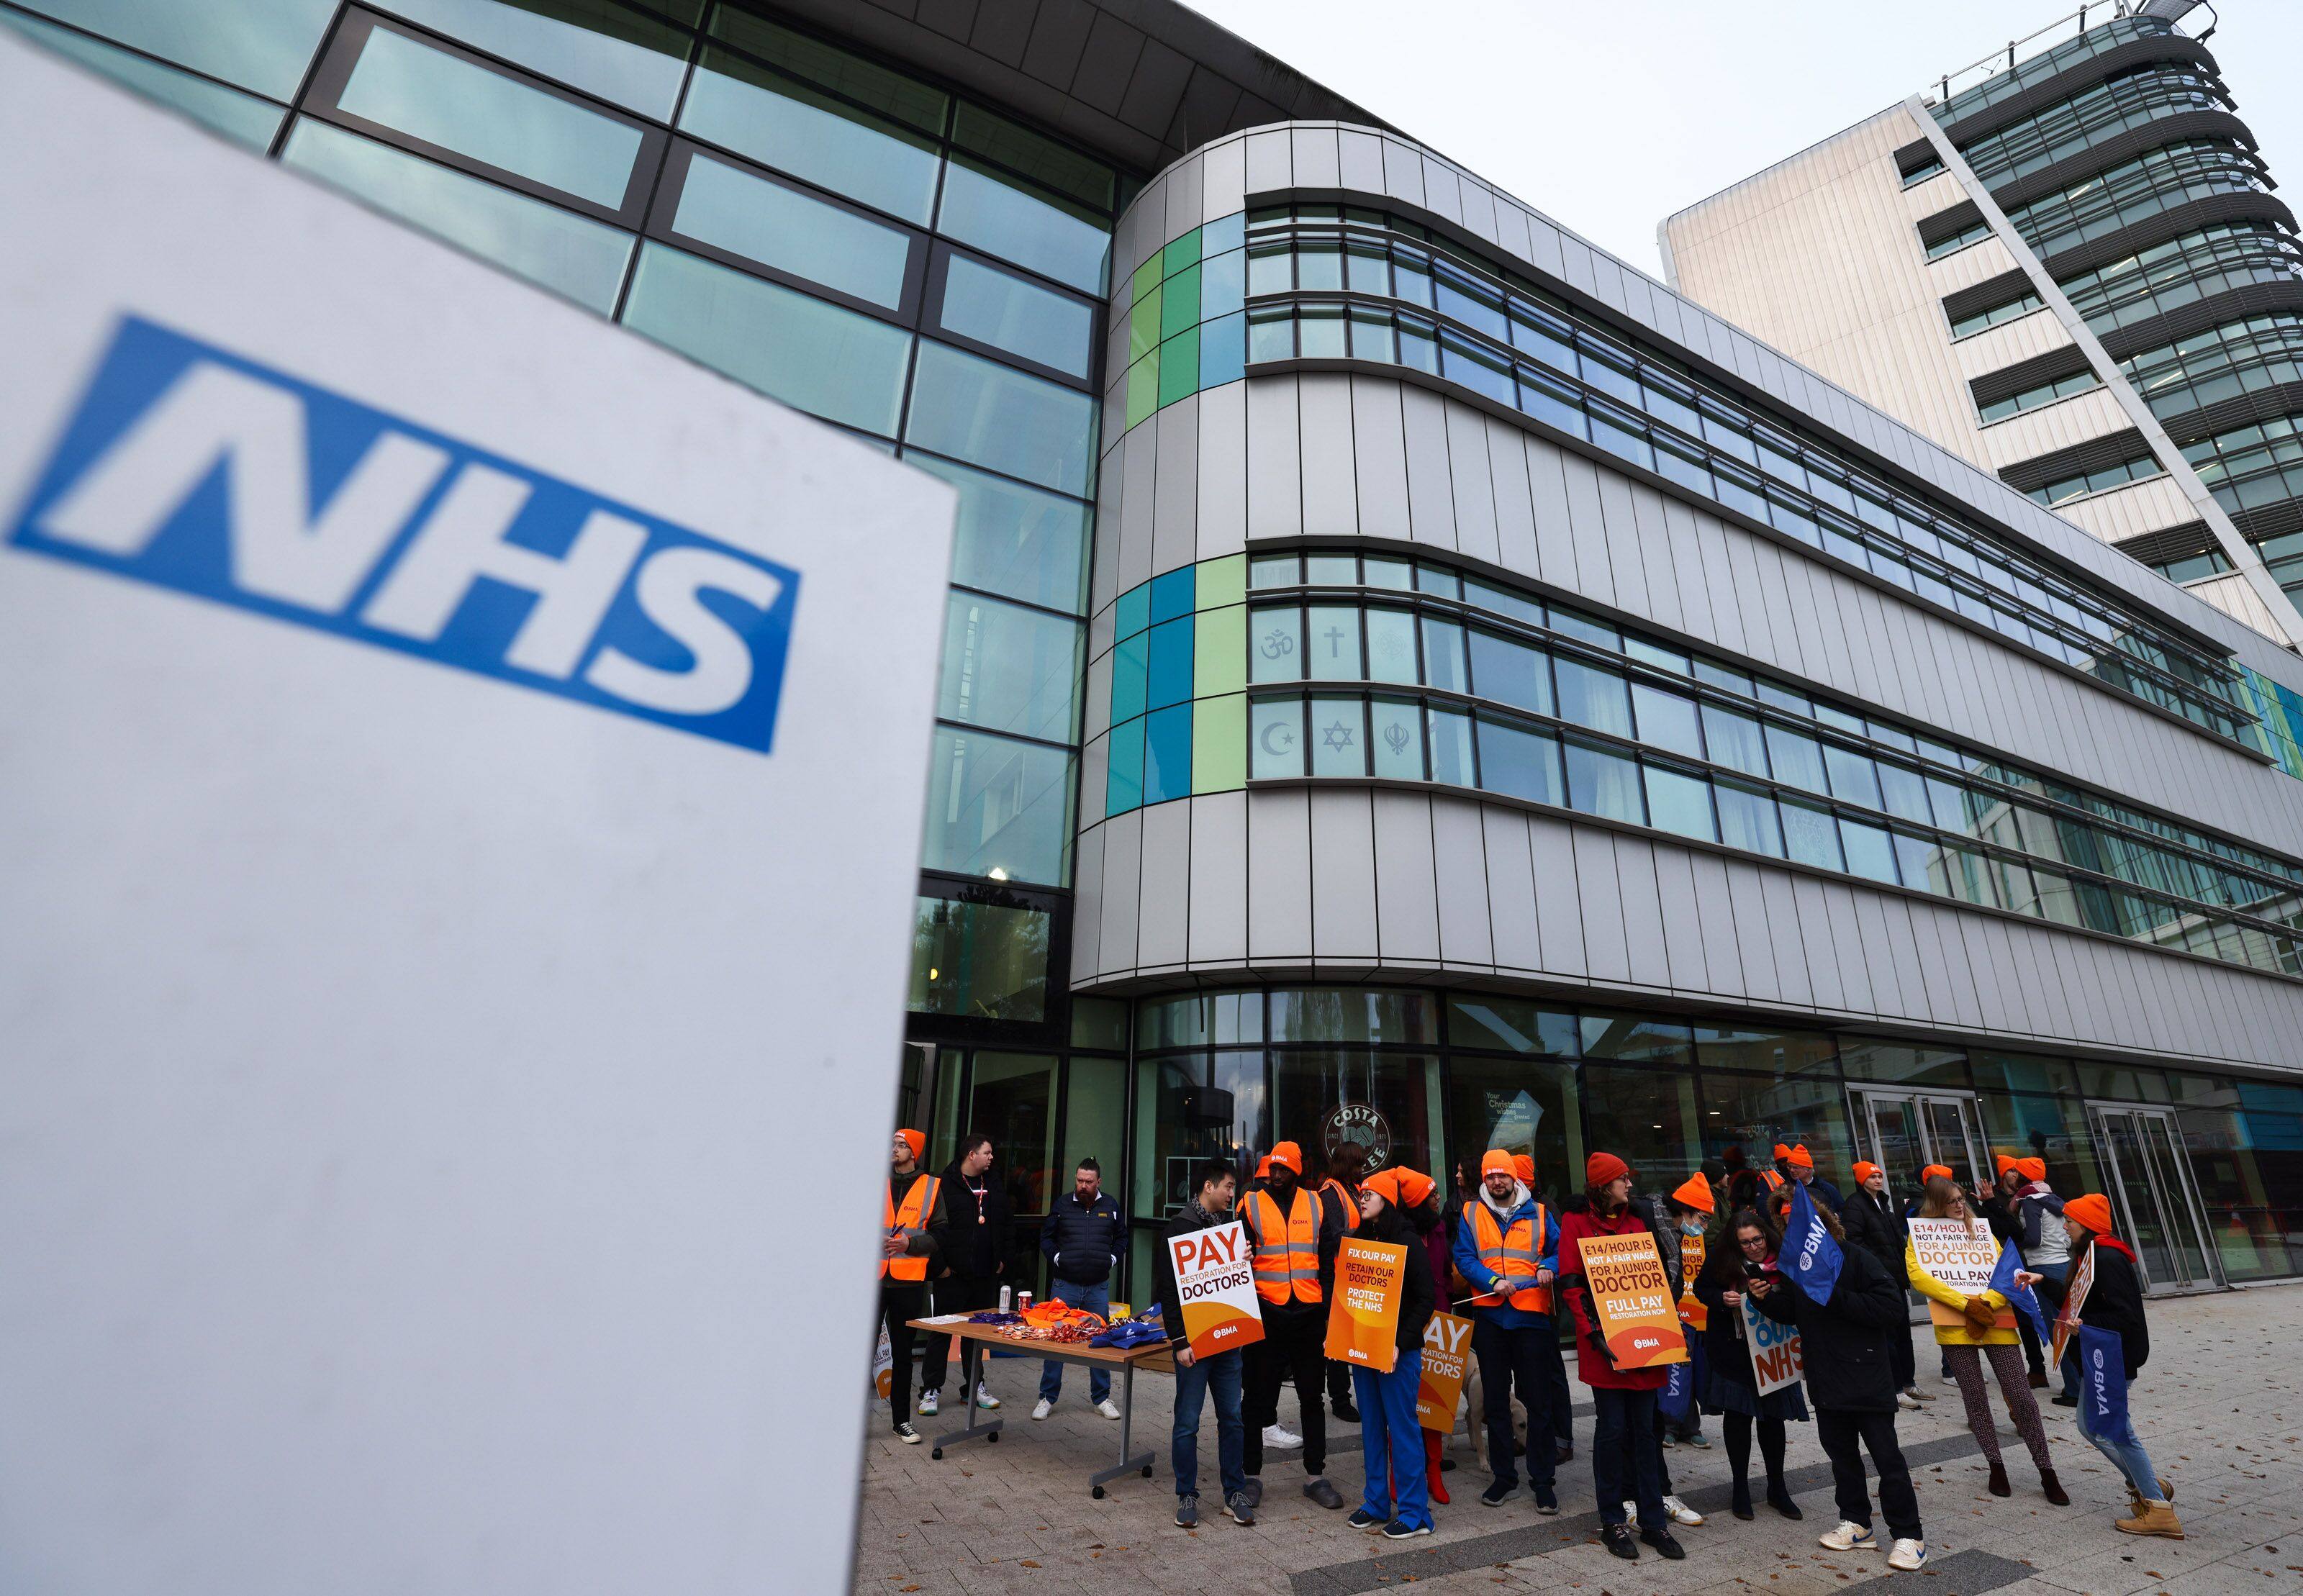 Junior doctors in England begin a 6-day walkout as their months-long pay dispute drags on, adding pressure on the National Health Service and dealing another blow to Rishi Sunak’s pledge to cut waiting lists. Photo: Bloomberg/File